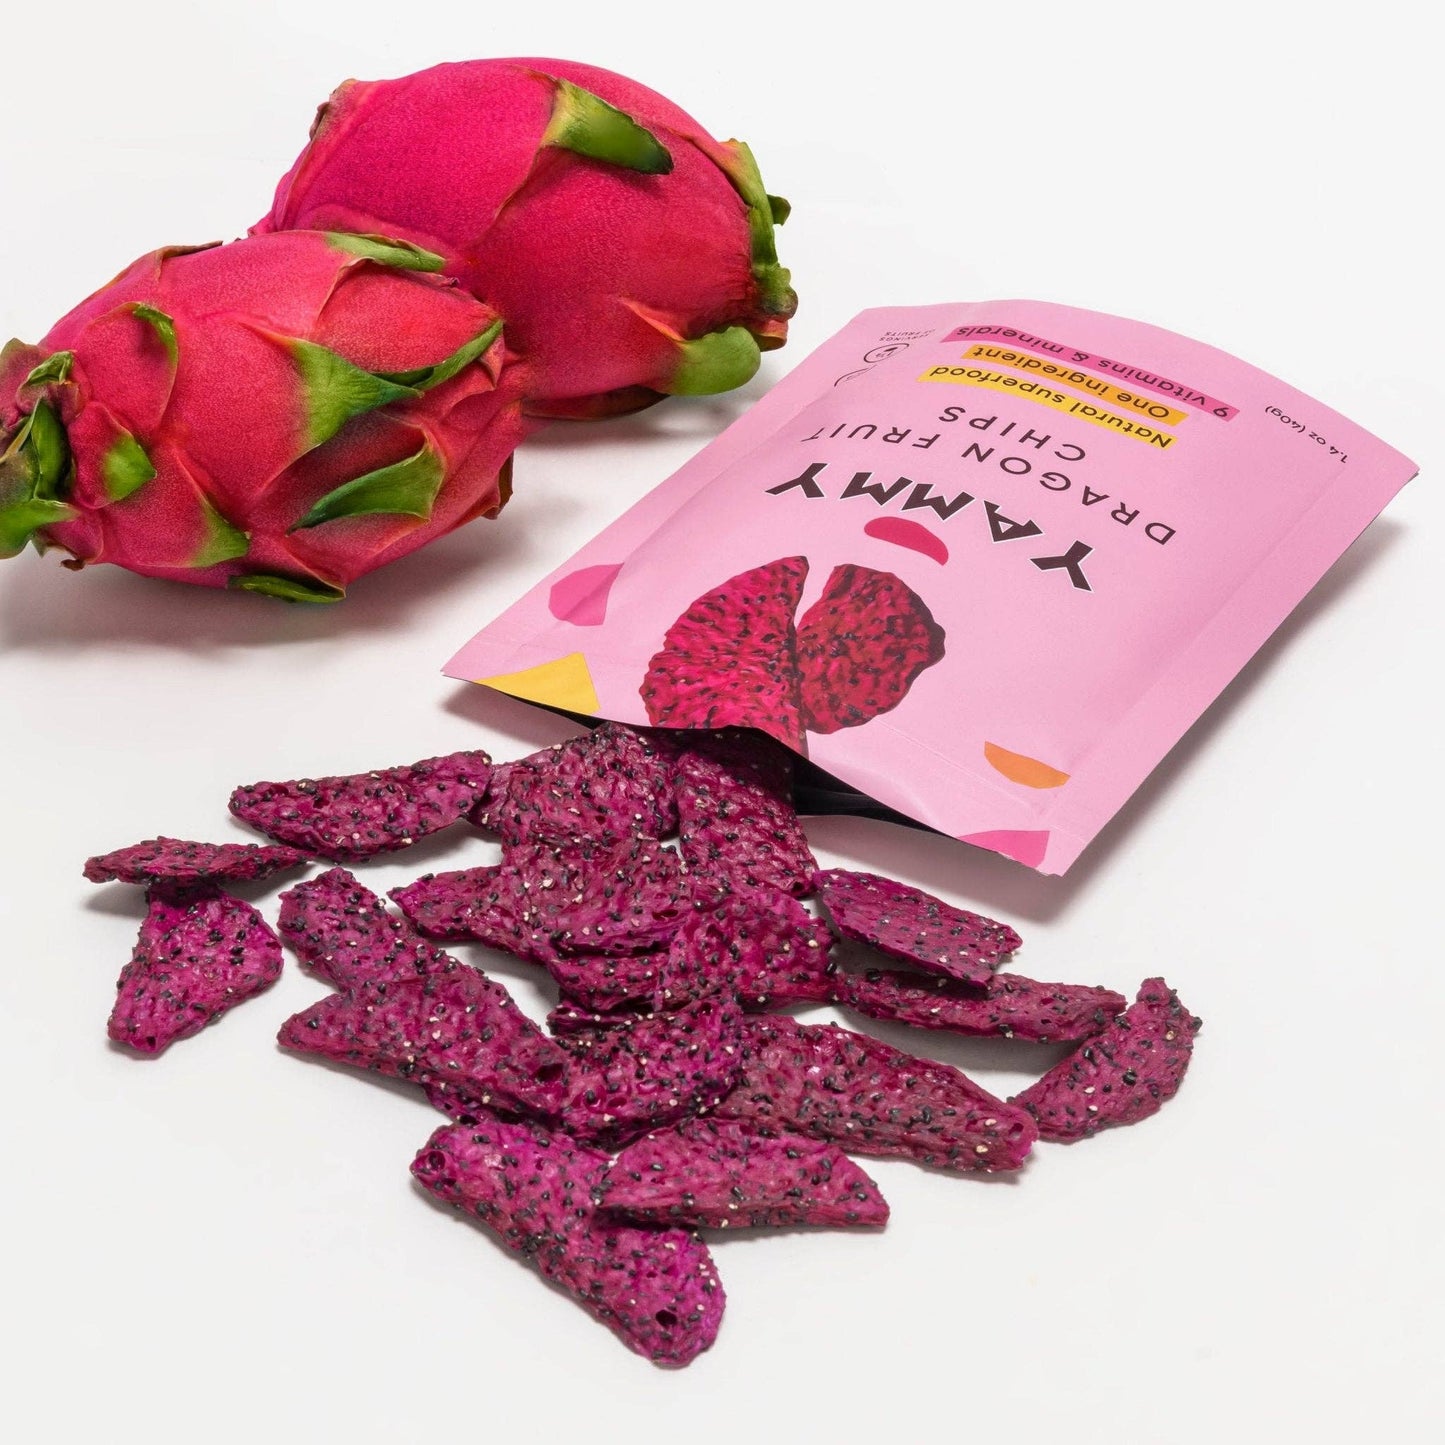 Yammy Dried Dragon Fruit Chips